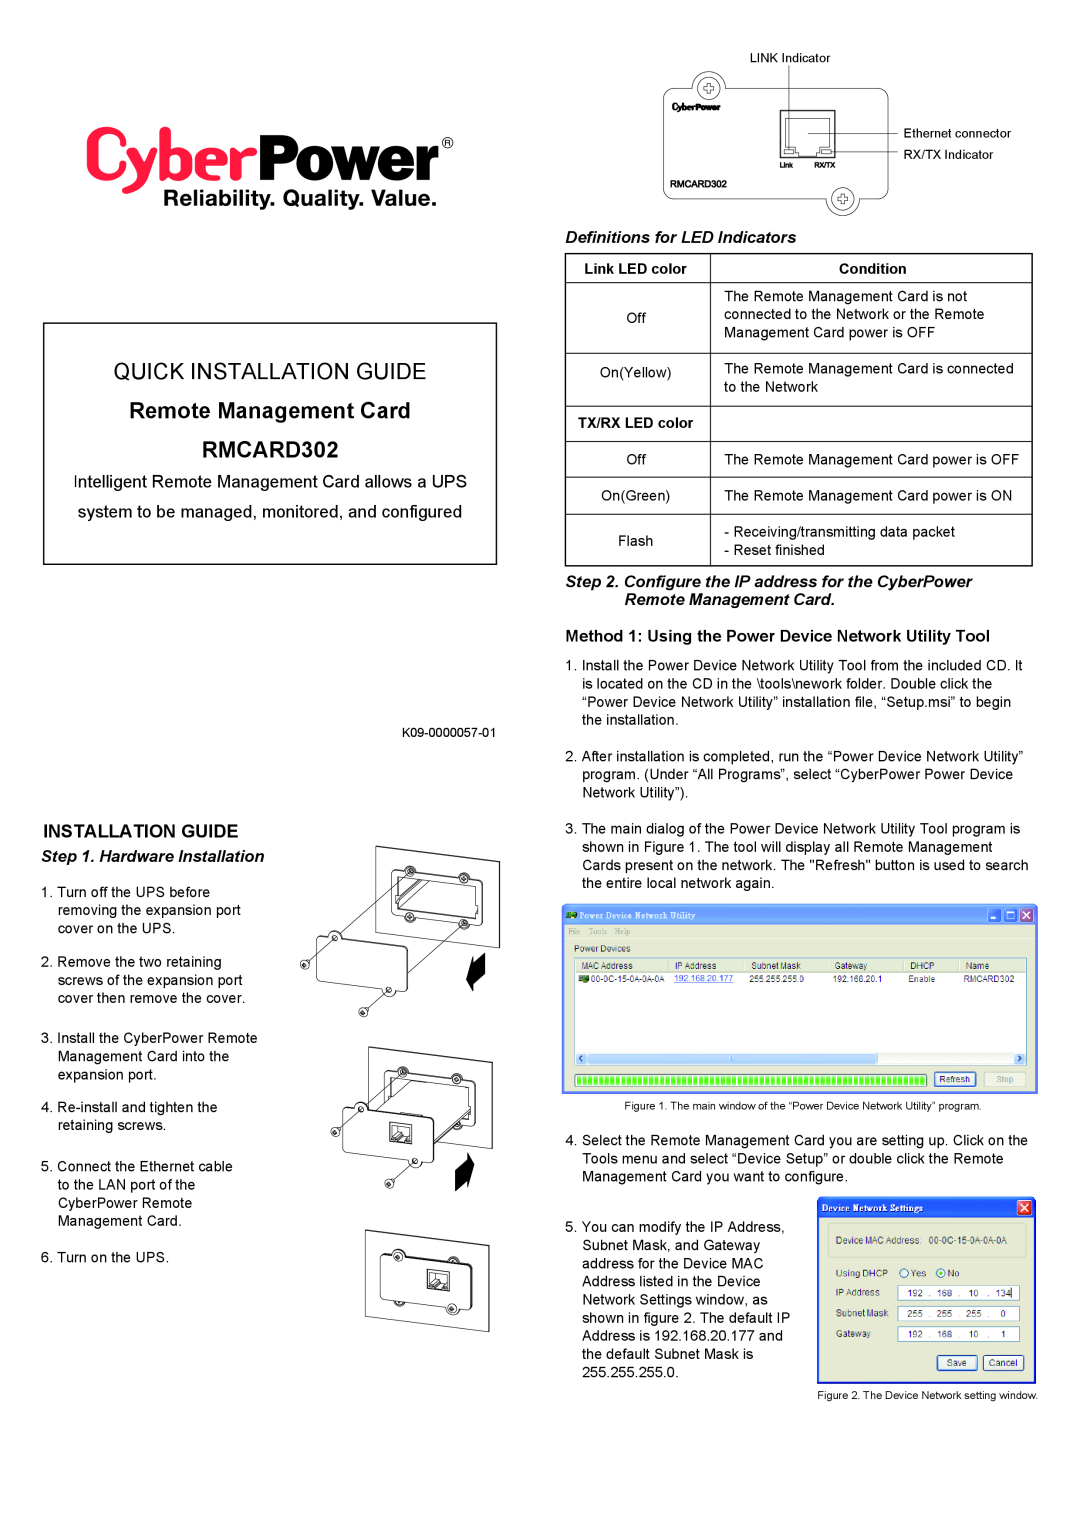 CyberPower Systems RMCARD302 manual Installation Guide, Method 1 Using the Power Device Network Utility Tool, Condition 